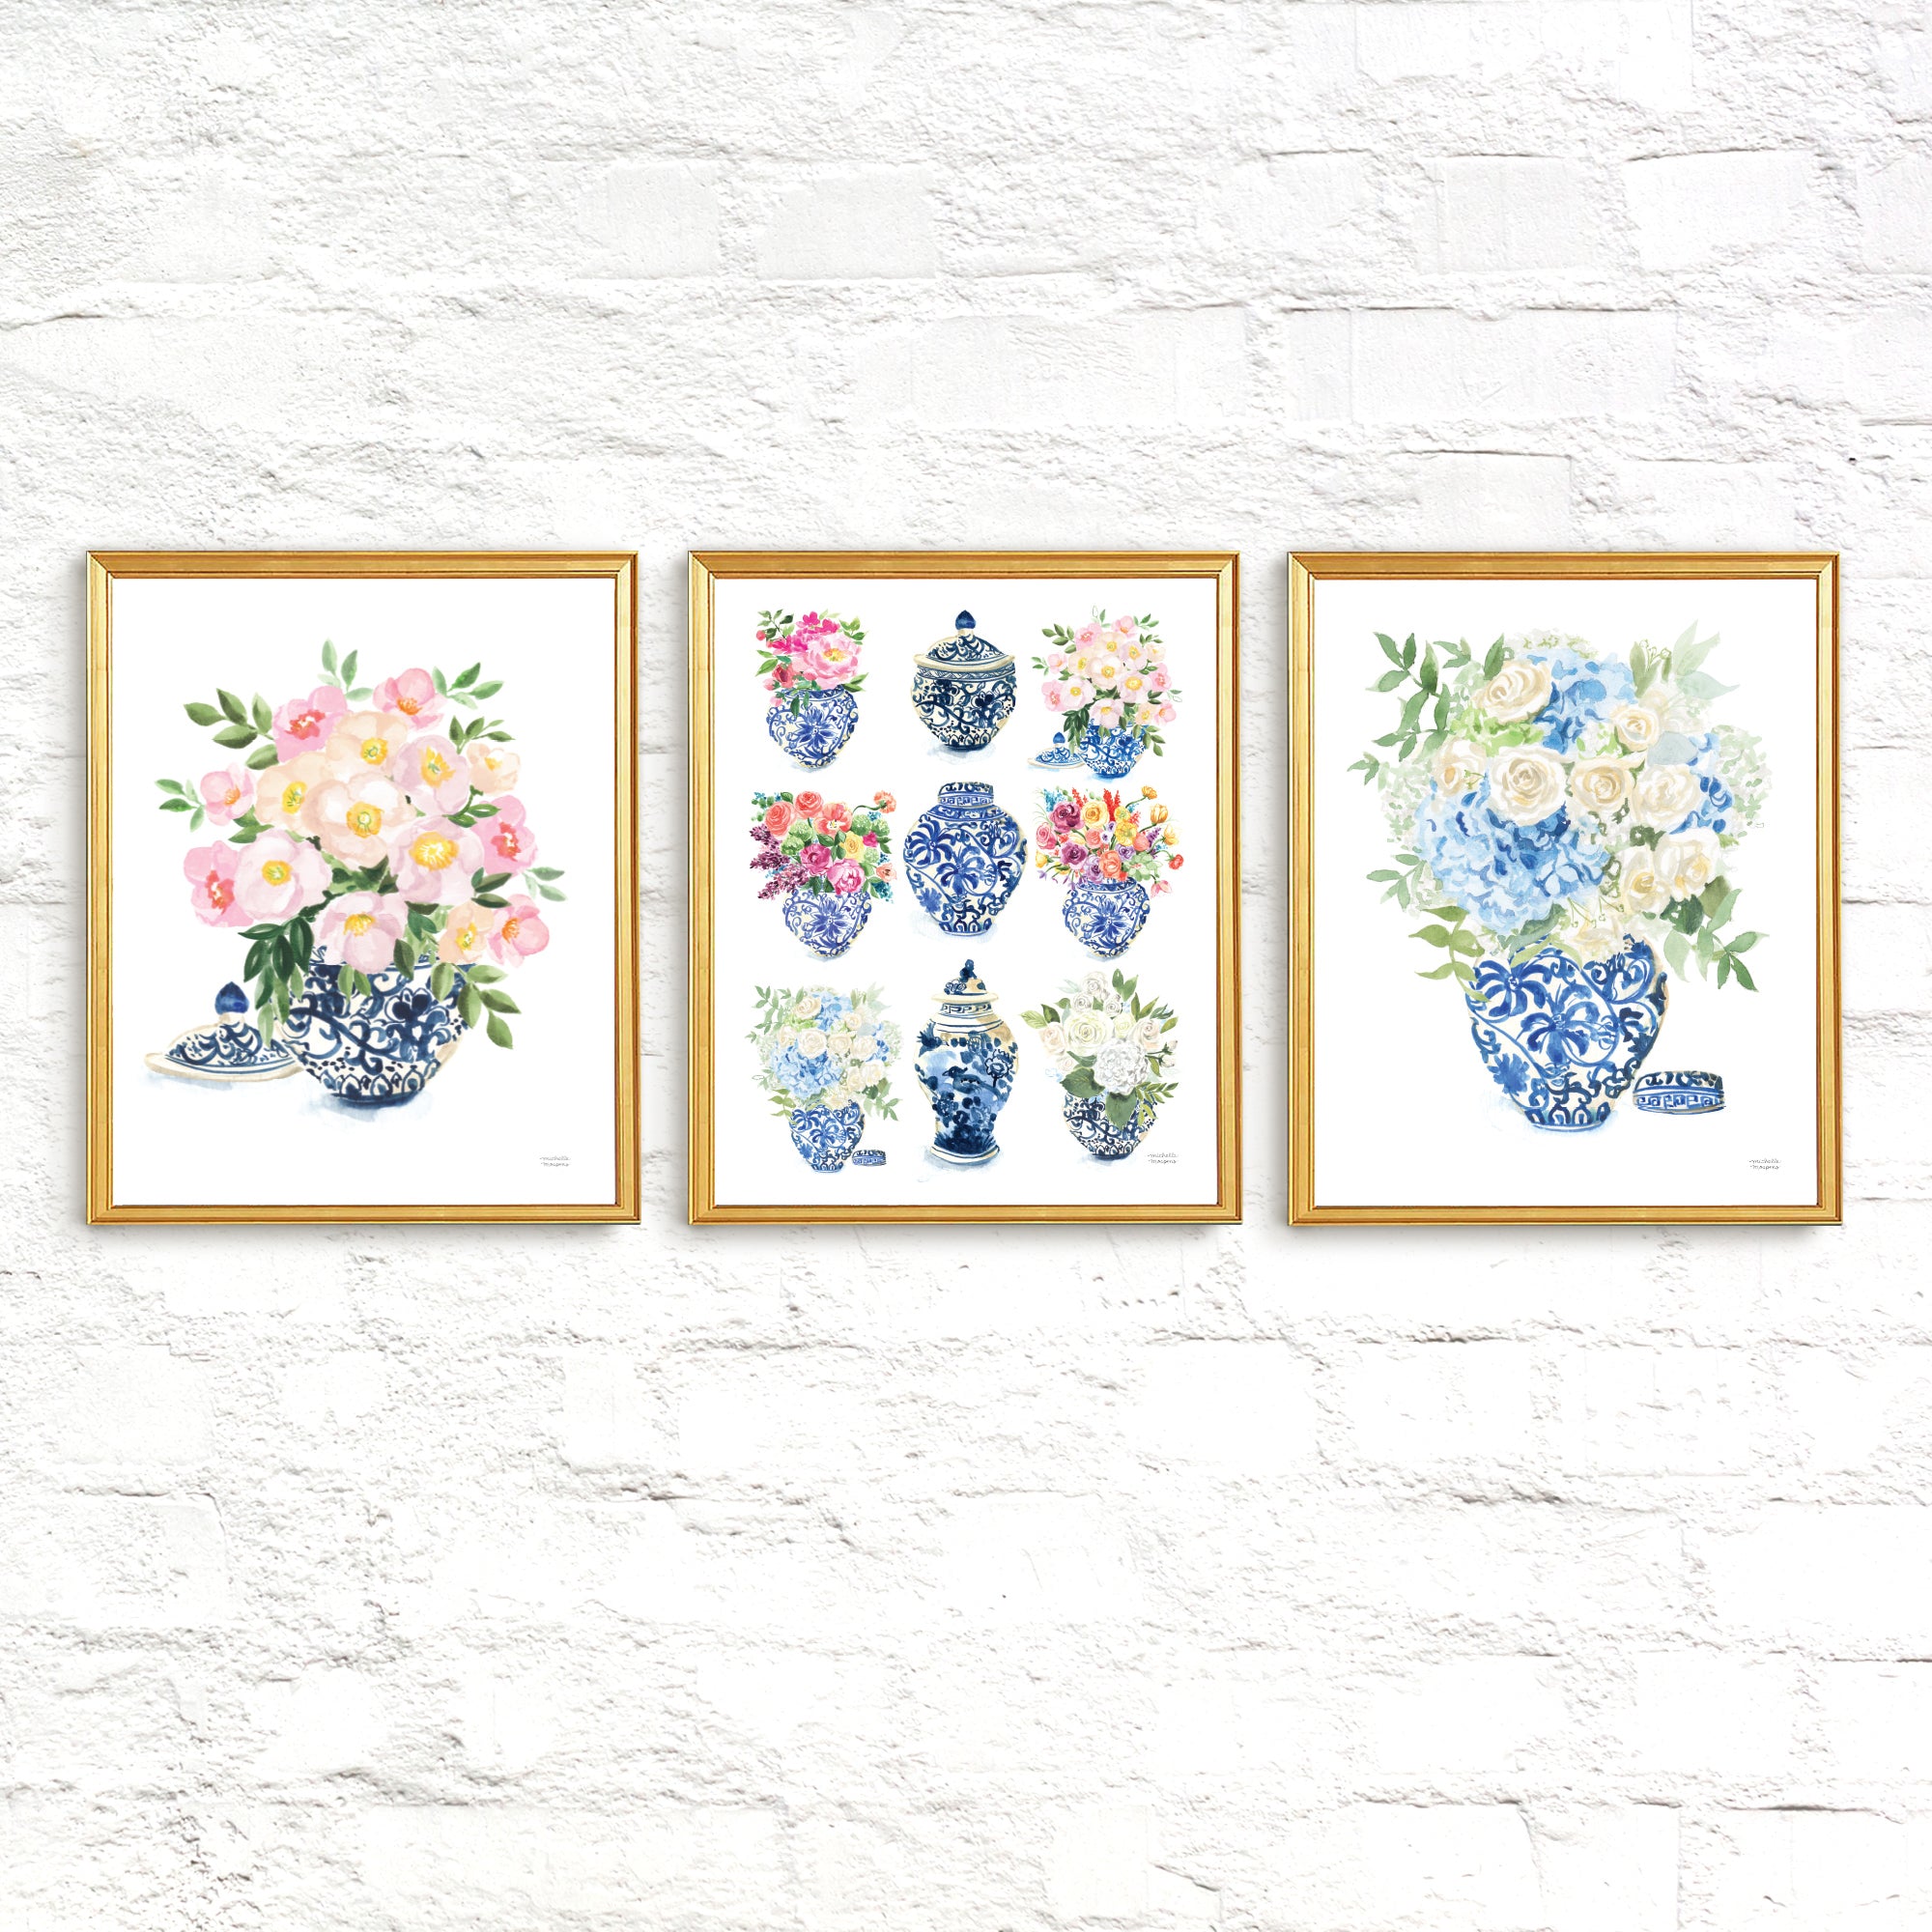 Three paper art prints with flowers in blue and white ginger jars. Watercolor whimsical illustrations perfectly match the traditional Grandmillennial home decor. Unframed ready for you to add to your own matt and or frame you have at home.